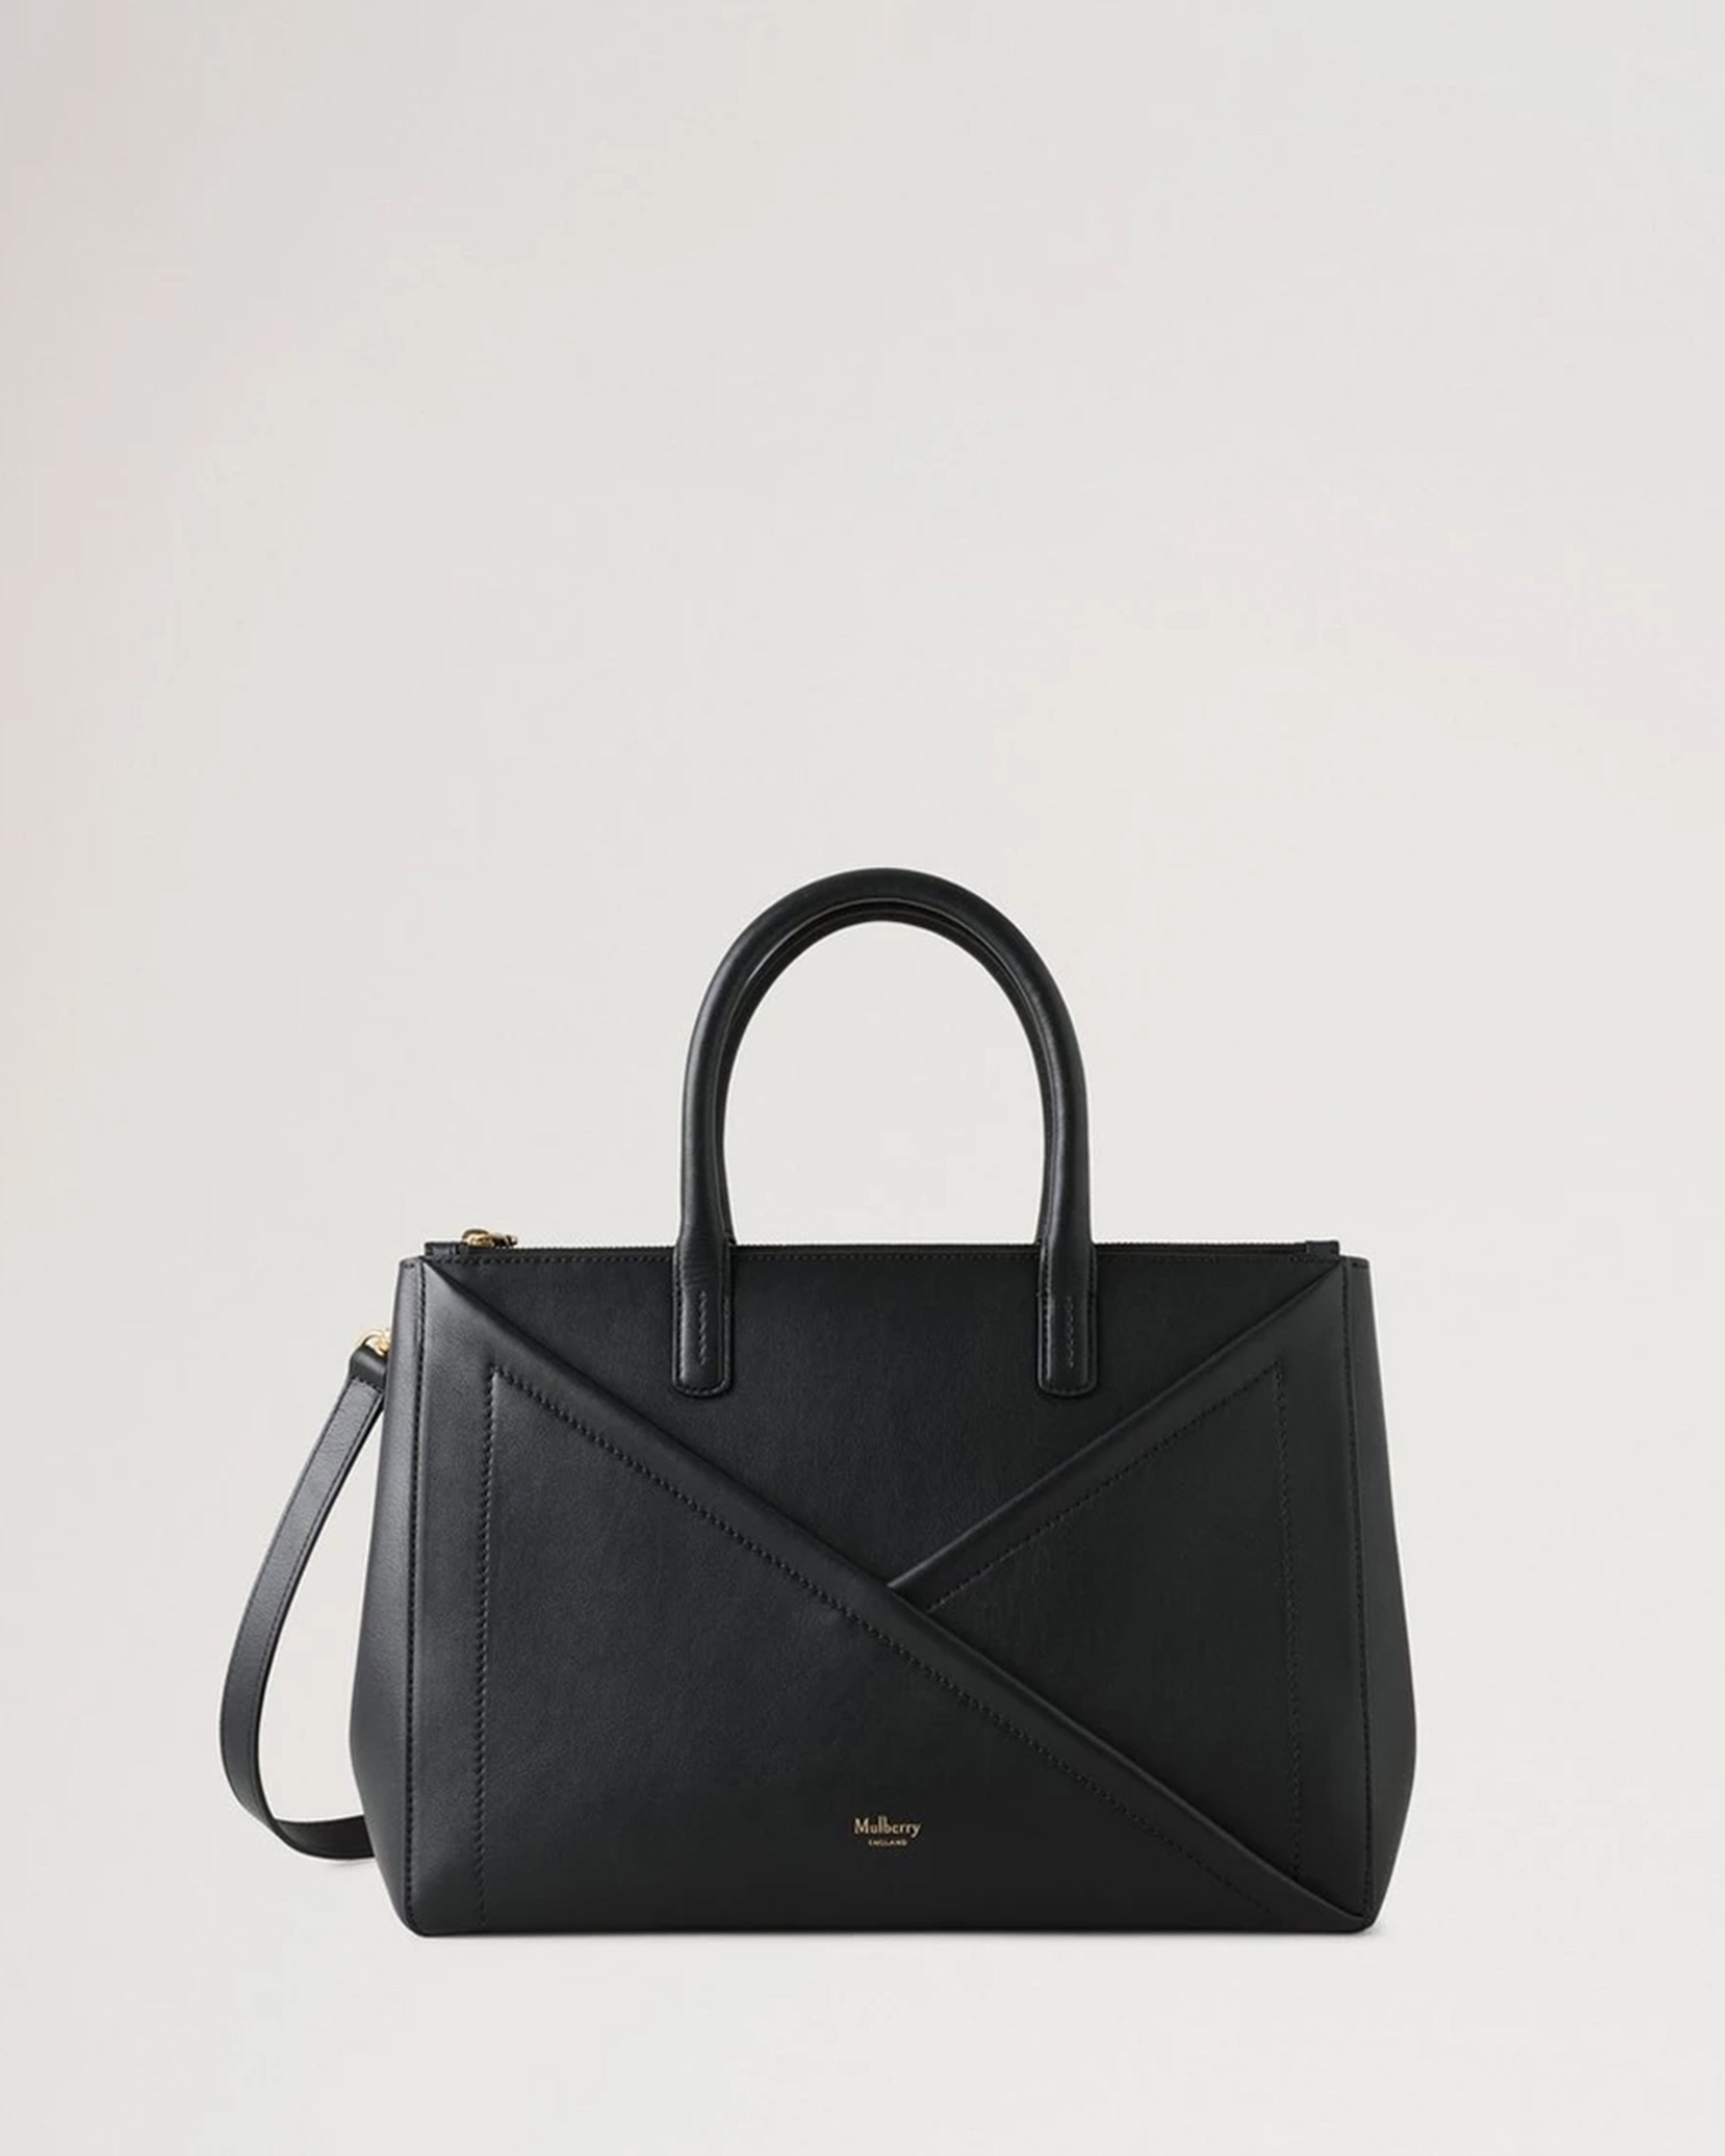 New Arrivals for Women | Designer Bags & Accessories | Mulberry